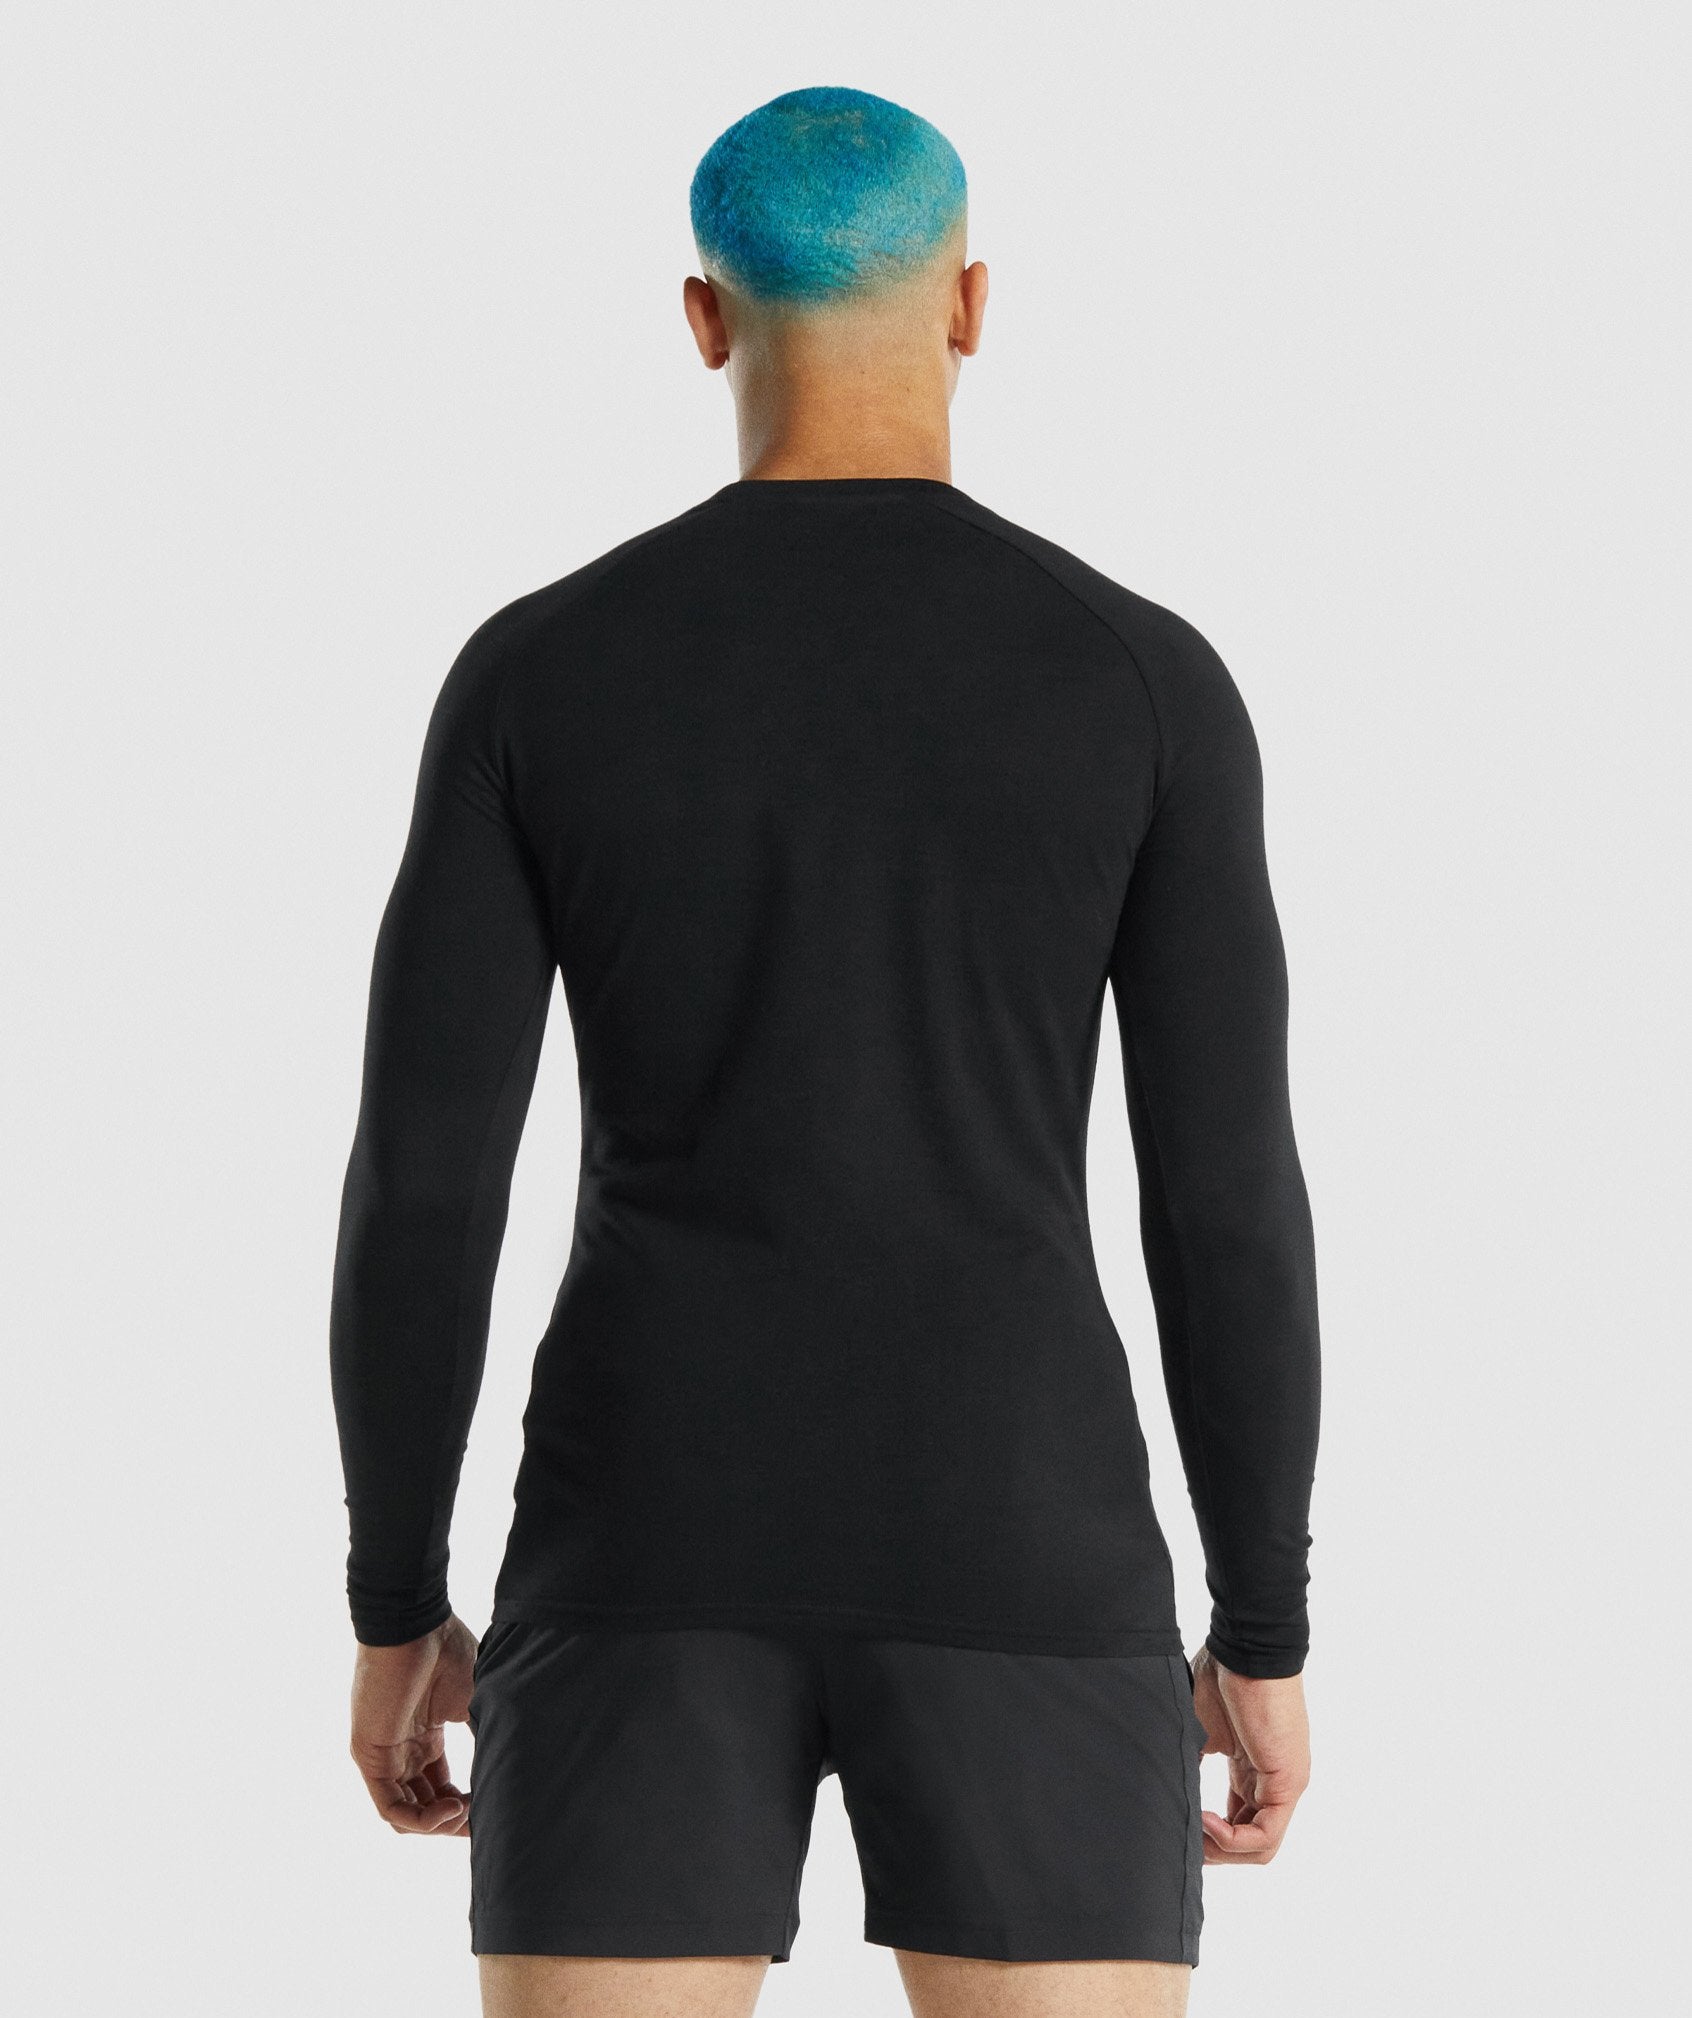 Apollo Long Sleeve T-Shirt in Black - view 3